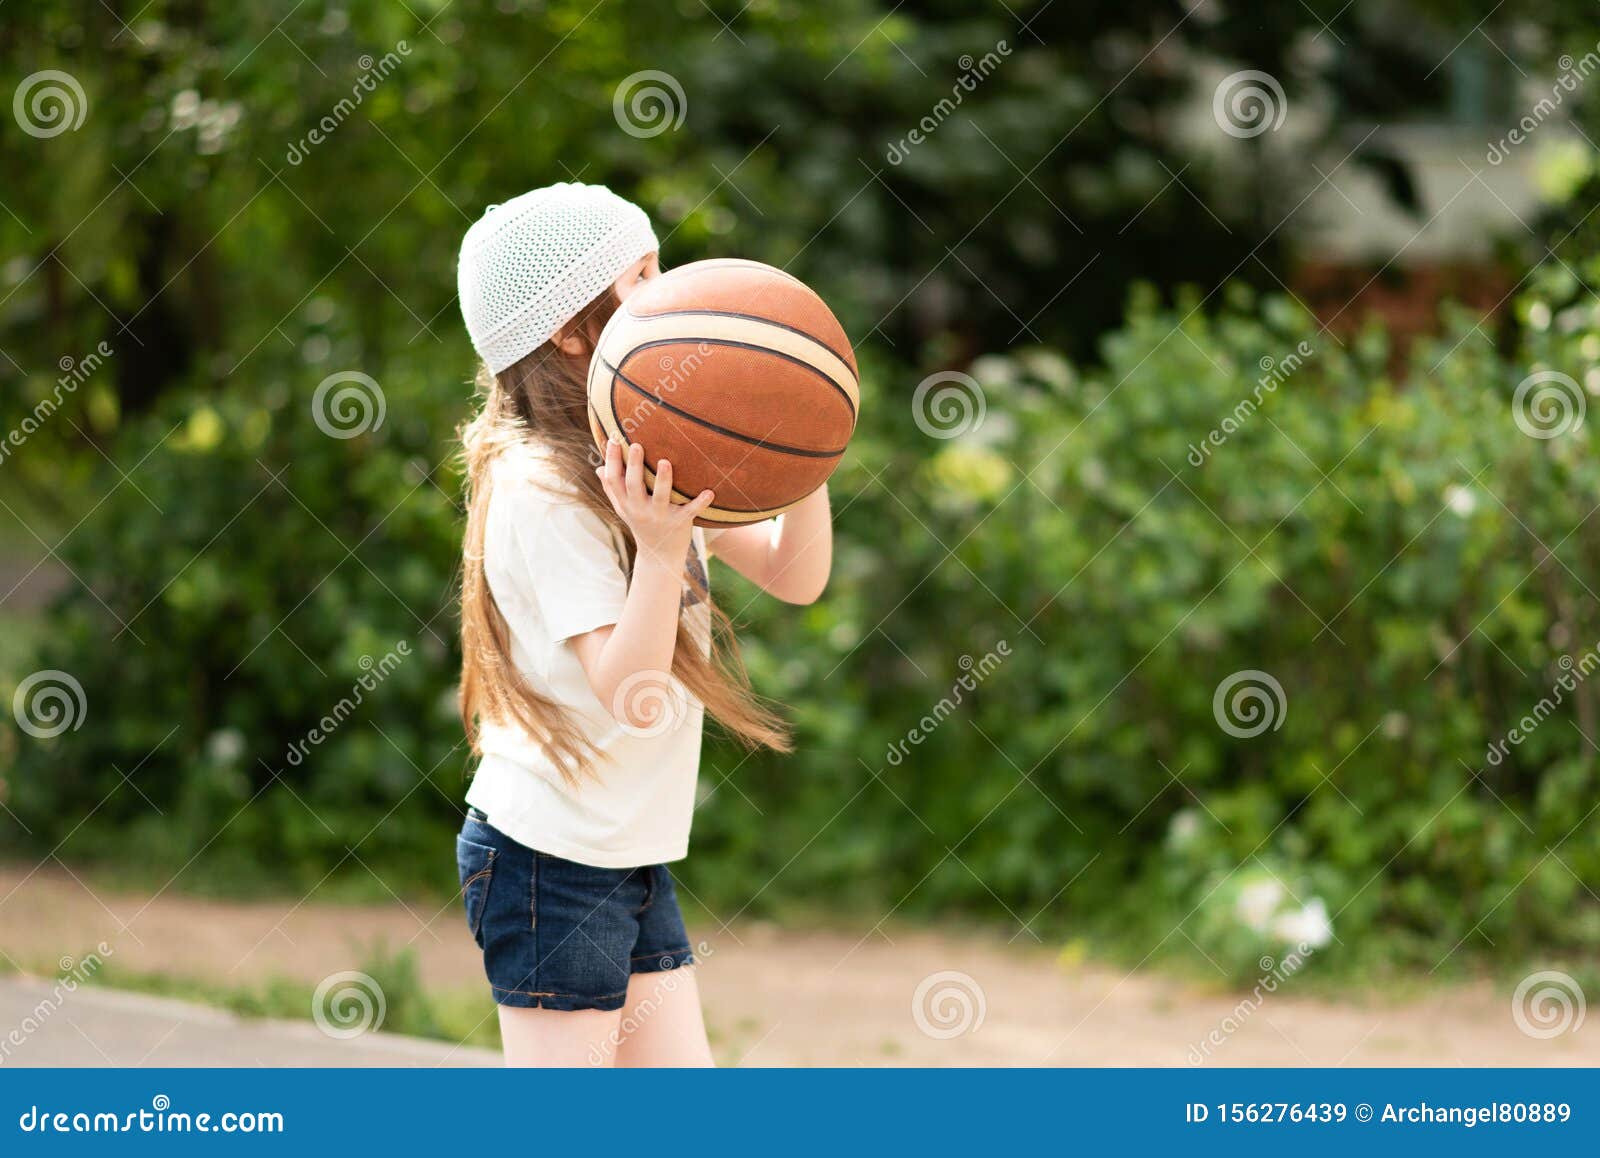 Little Girl With Long Hair Playing Basketball. Stock Image ...